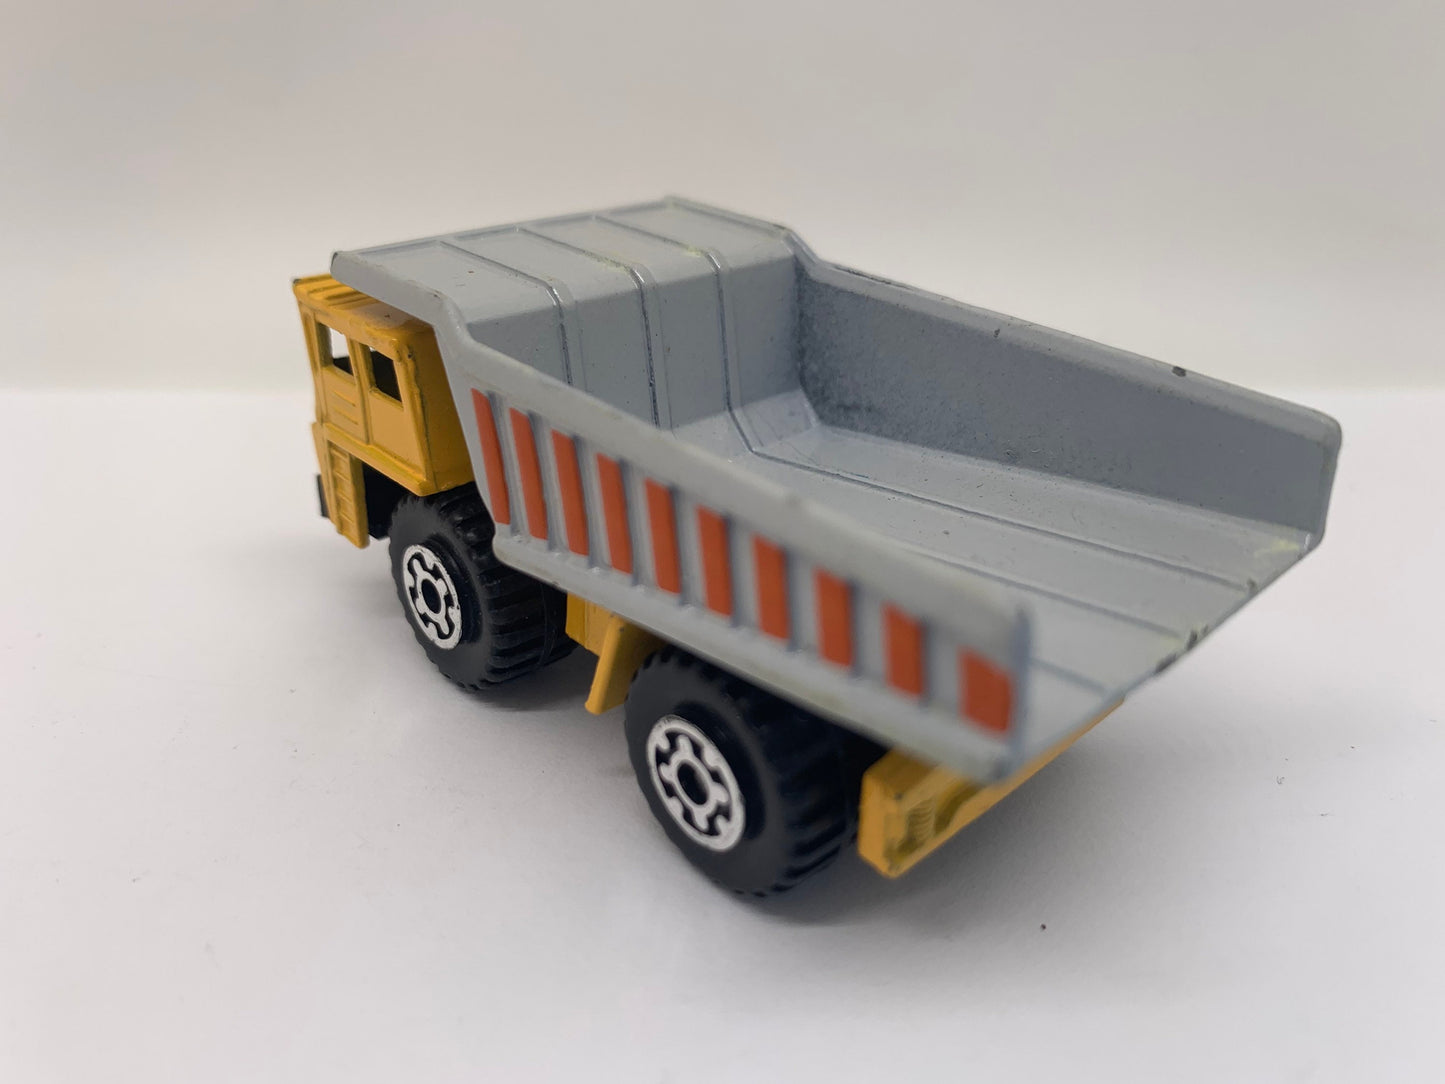 Matchbox Faun Quarry Dump Truck Turf Hauler Yellow Collectable Miniature Scale Model Toy Car Perfect Birthday Gift